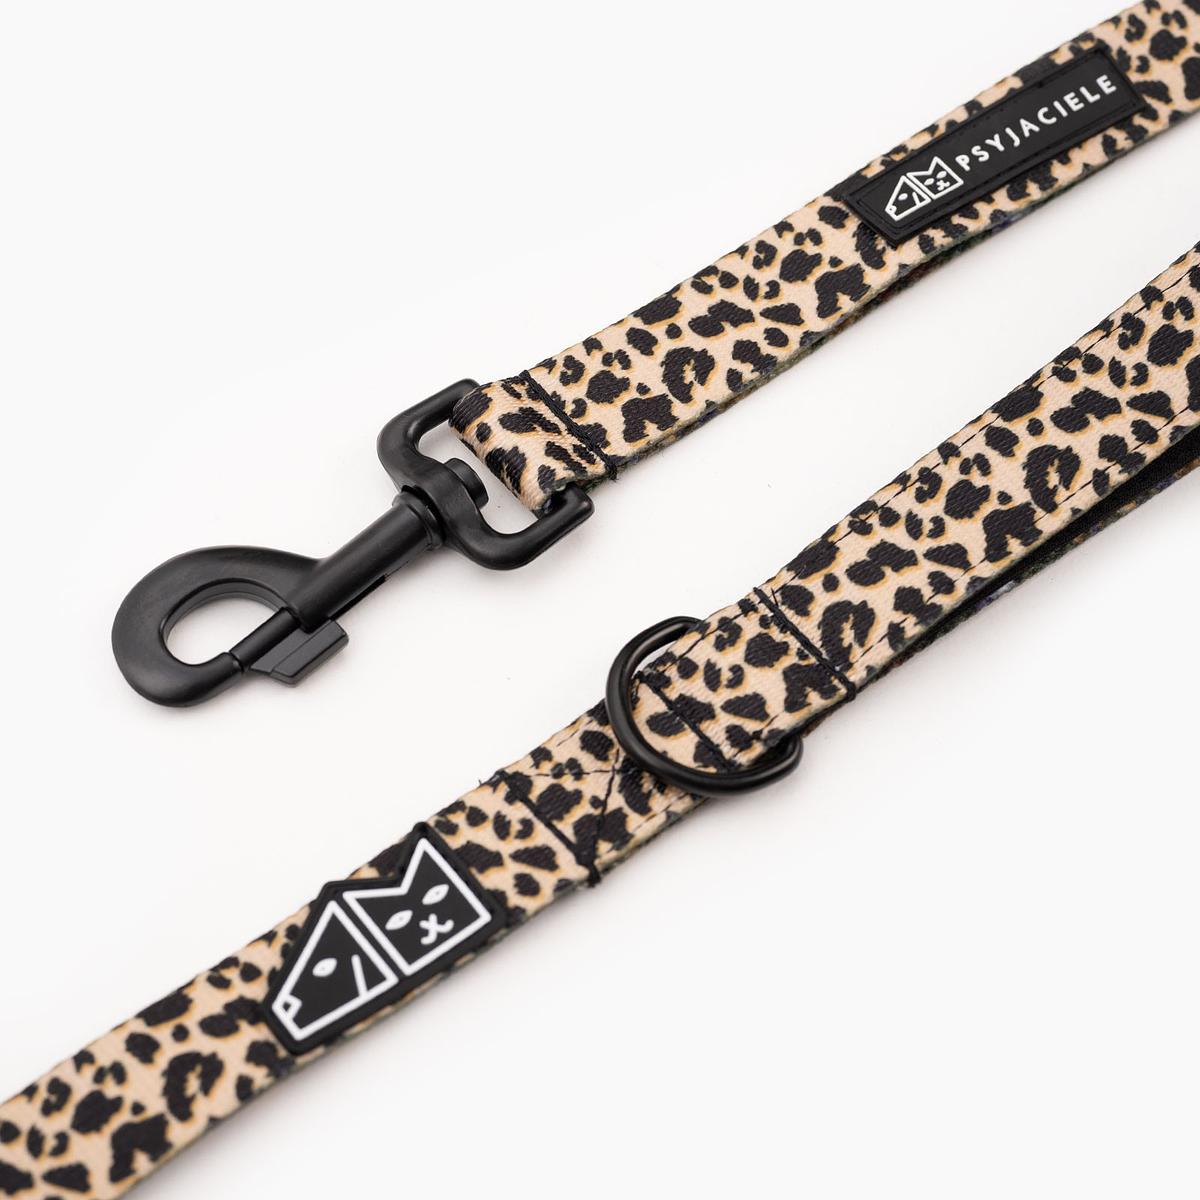 "Respect the wildness" city leash (LEOPARD PATTERN ON THE TOP)